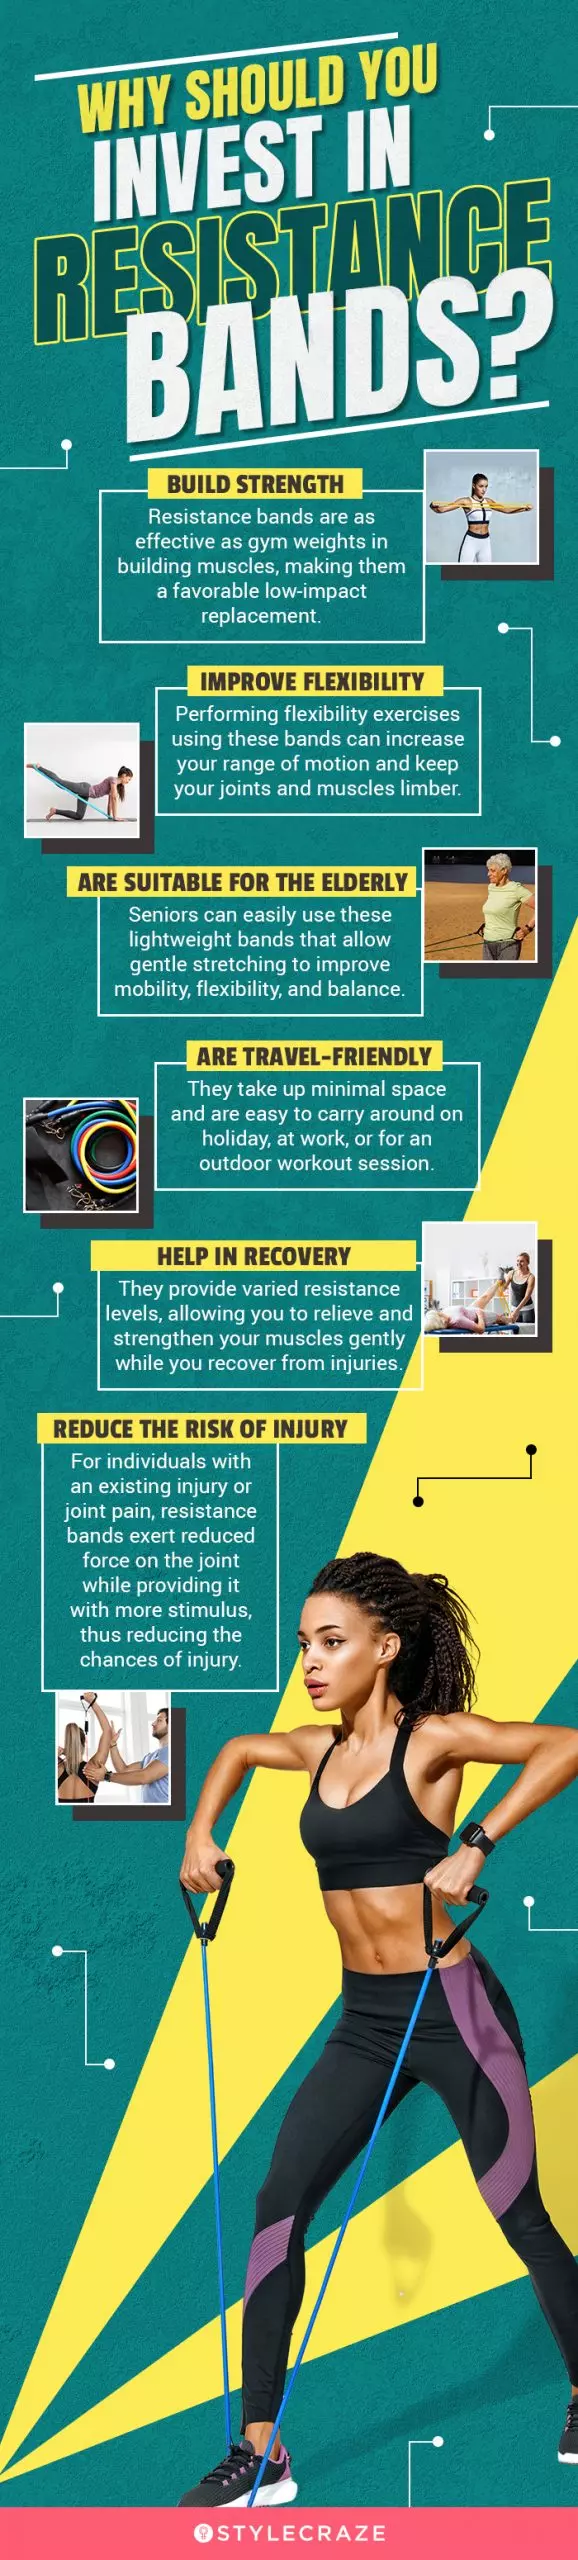 Why Should You Invest In Resistance Bands? (infographic)